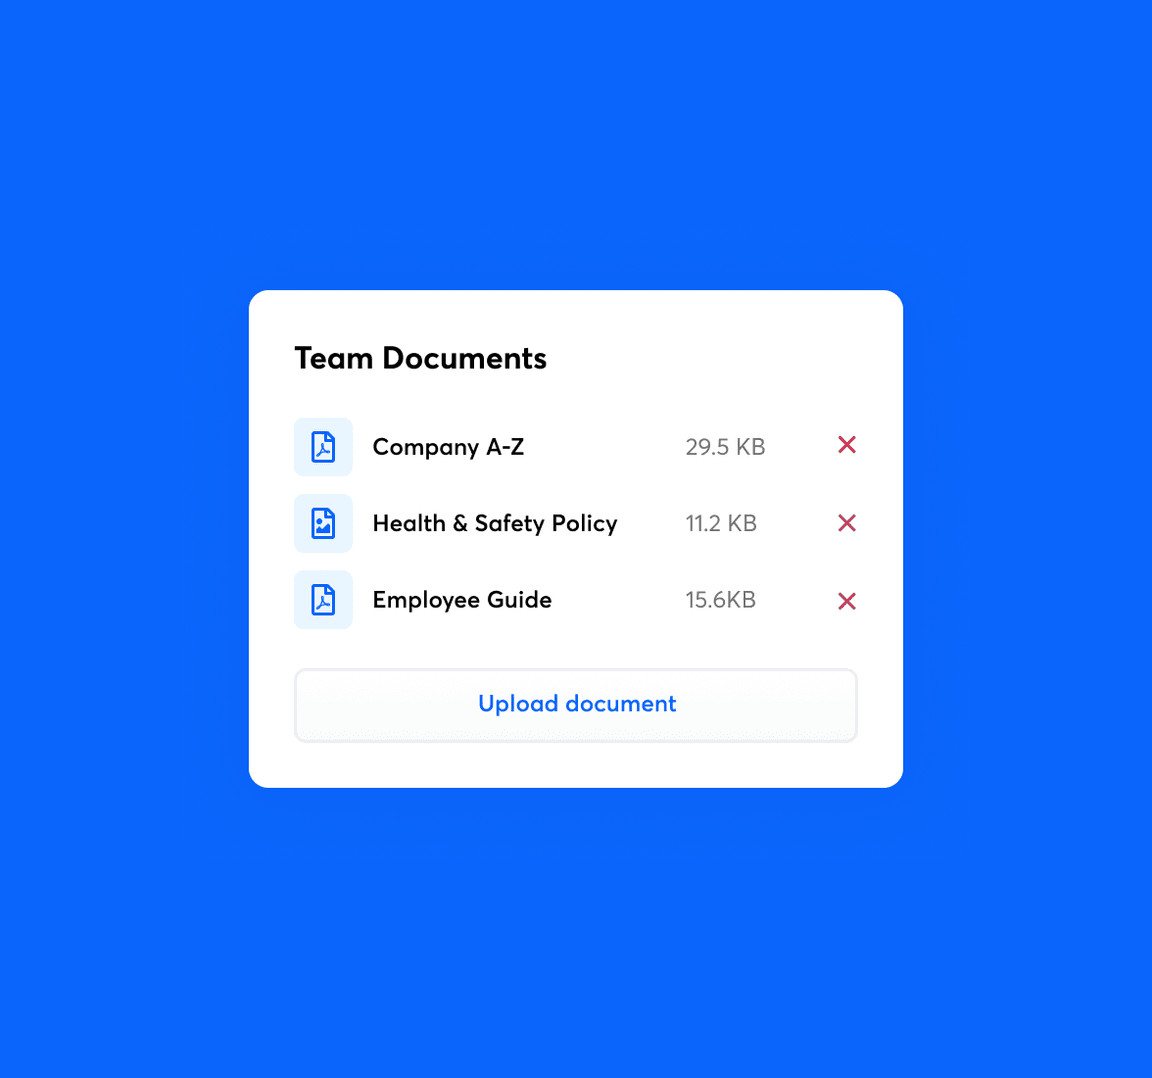 Team Documents screen in RotaCloud showing stored files: Company A-Z, Health & Safety Policy, Employee Guide.